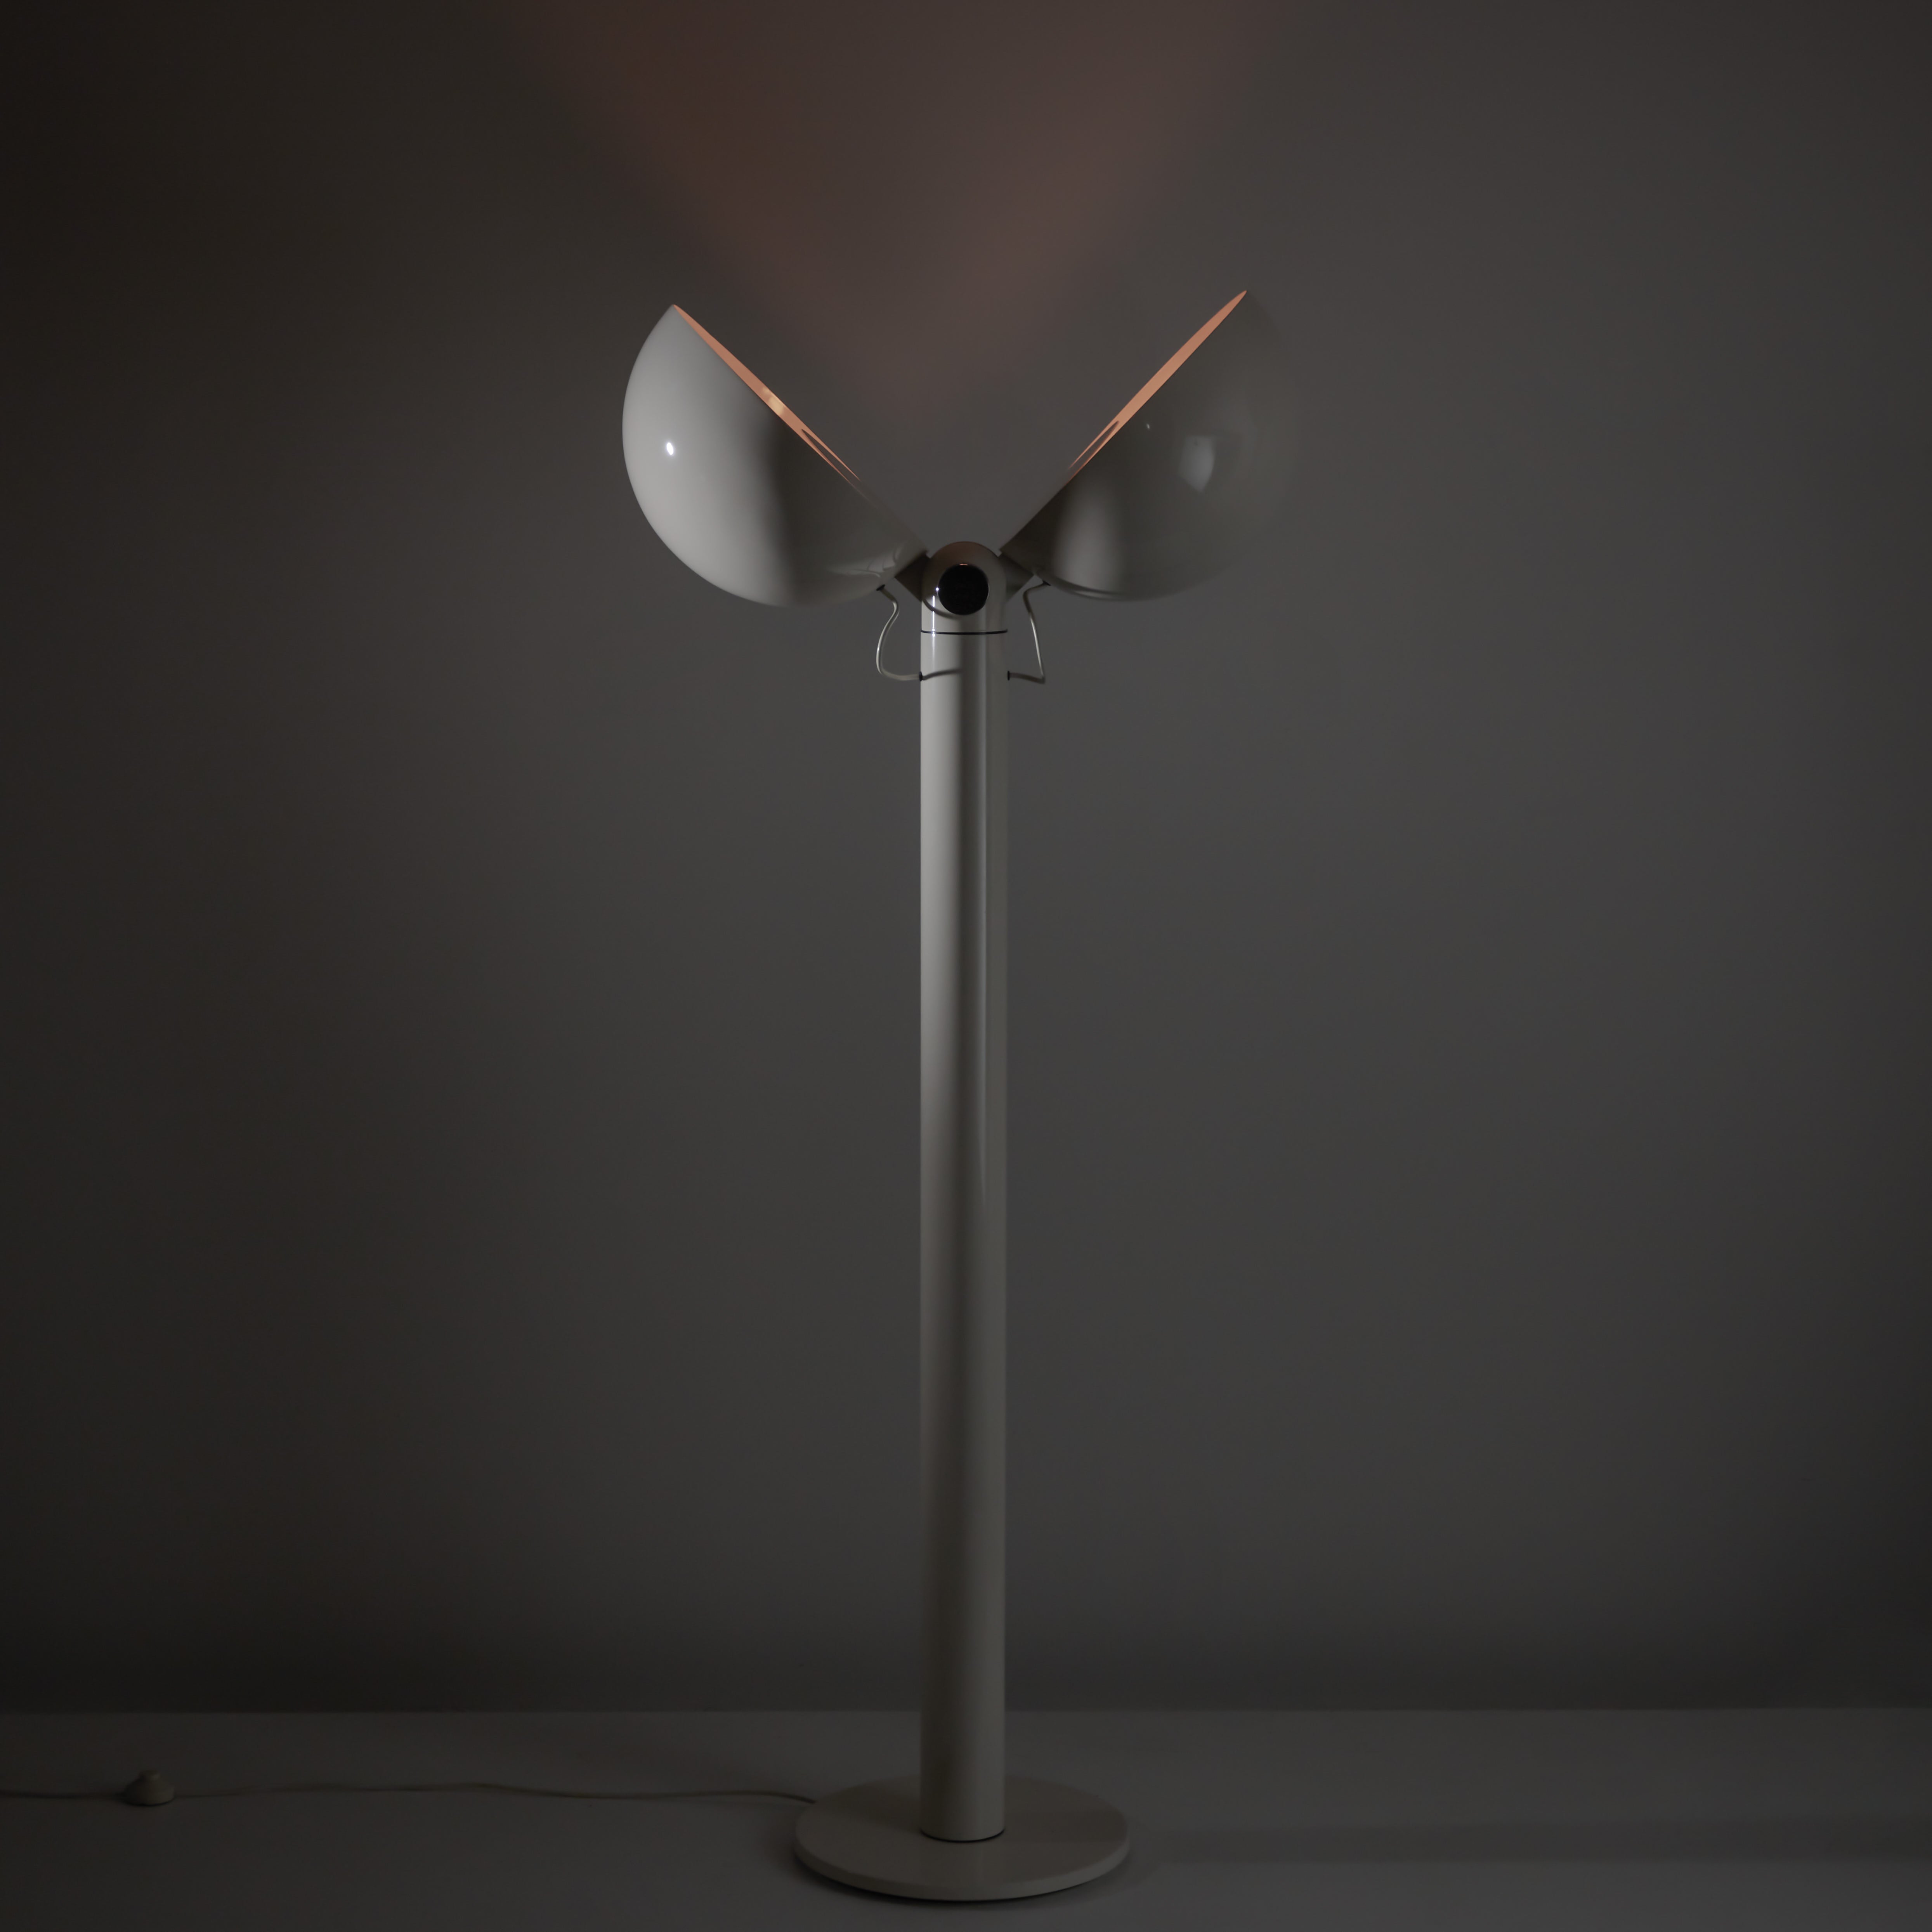 Rare XL ‘Cuffia Double' floor lamp by Franco Buzzi for Bieffeplast. Designed and manufactured in Italy, circa the 1960s. Large, sculptural floor lamp with white enameled finish and two half-sphere, adjustable shades that can control the level of